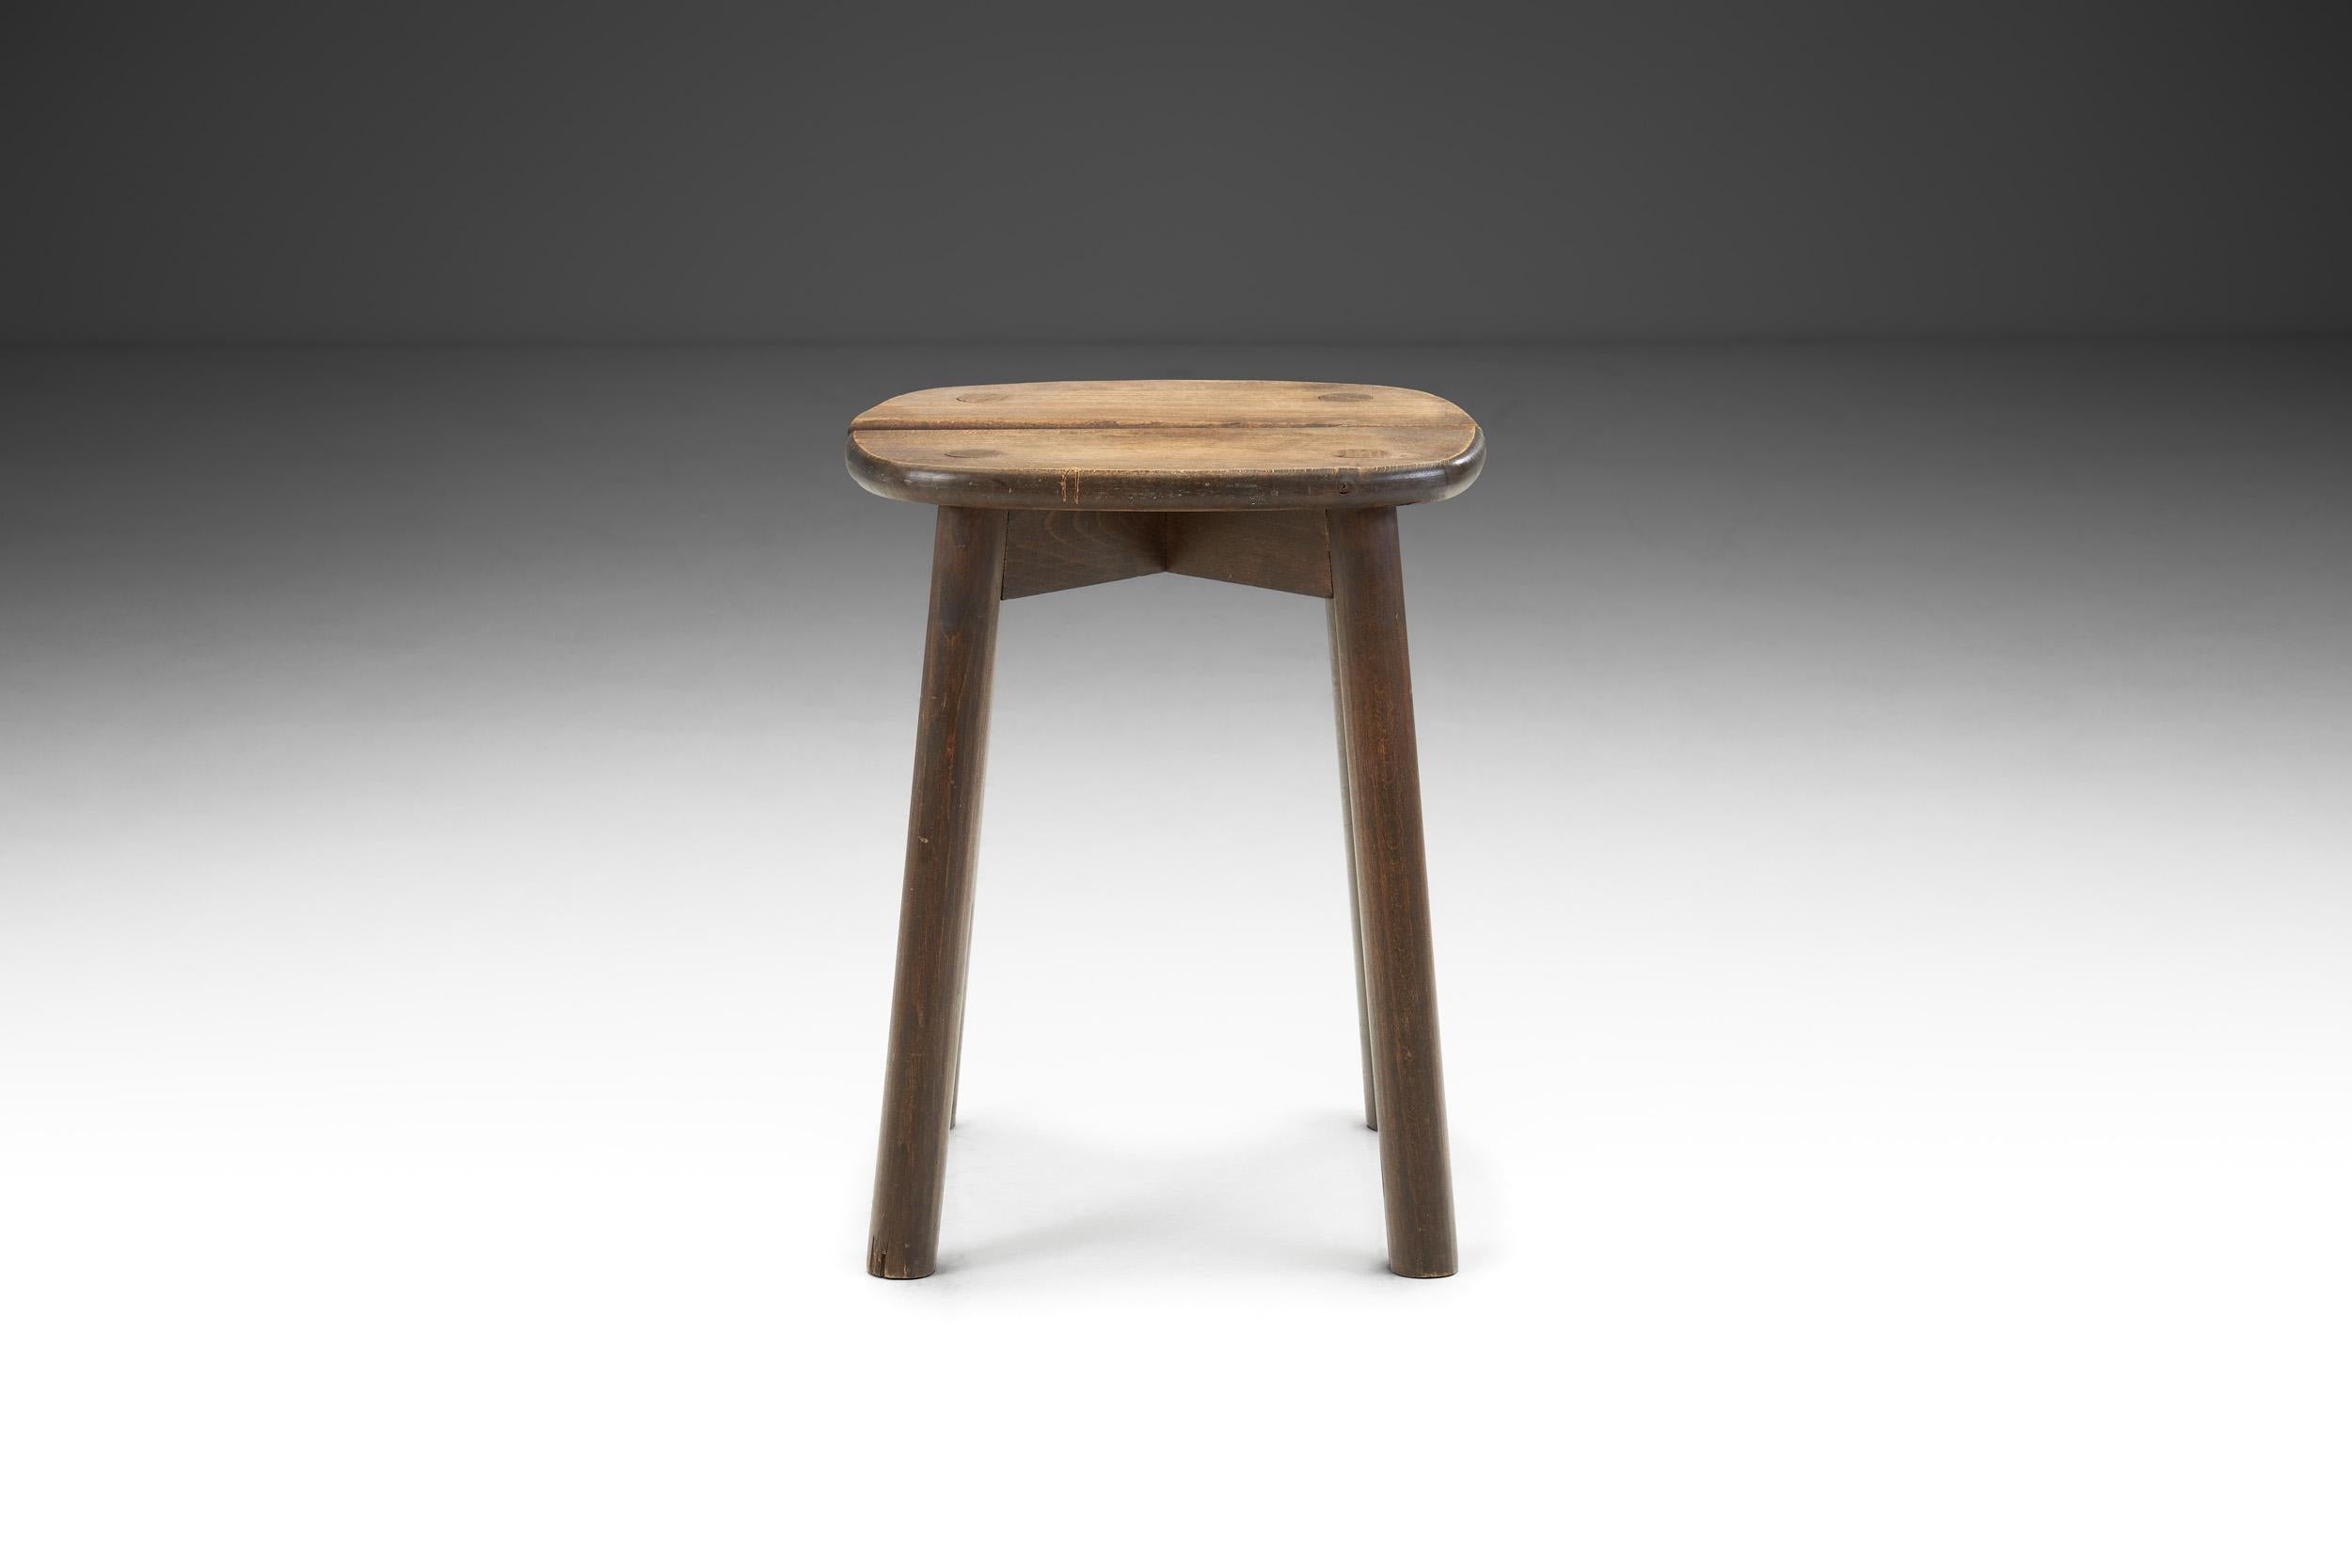 European Mid-Century Wooden Stool with Split Seat, Europe Ca 1950s For Sale